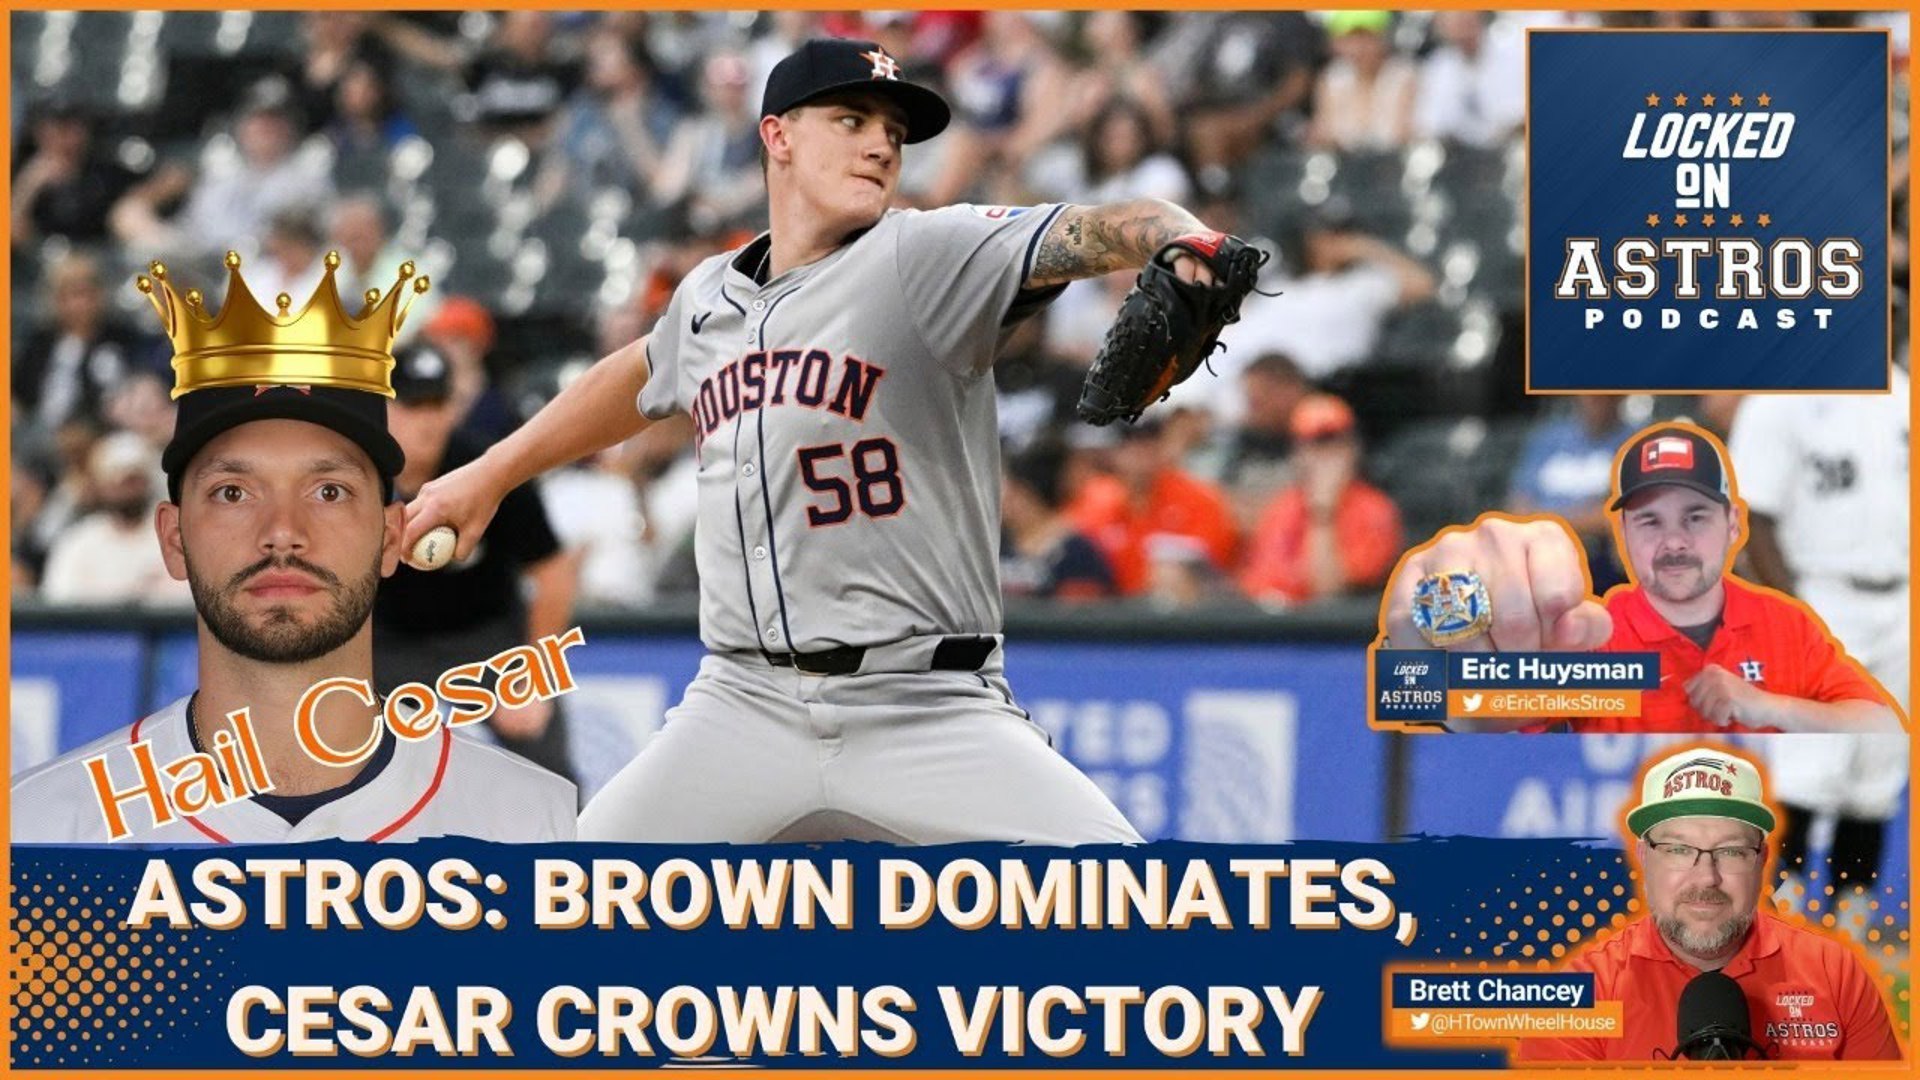 Astros: Hunter Brown dominates, as Cesar Crowns Victory